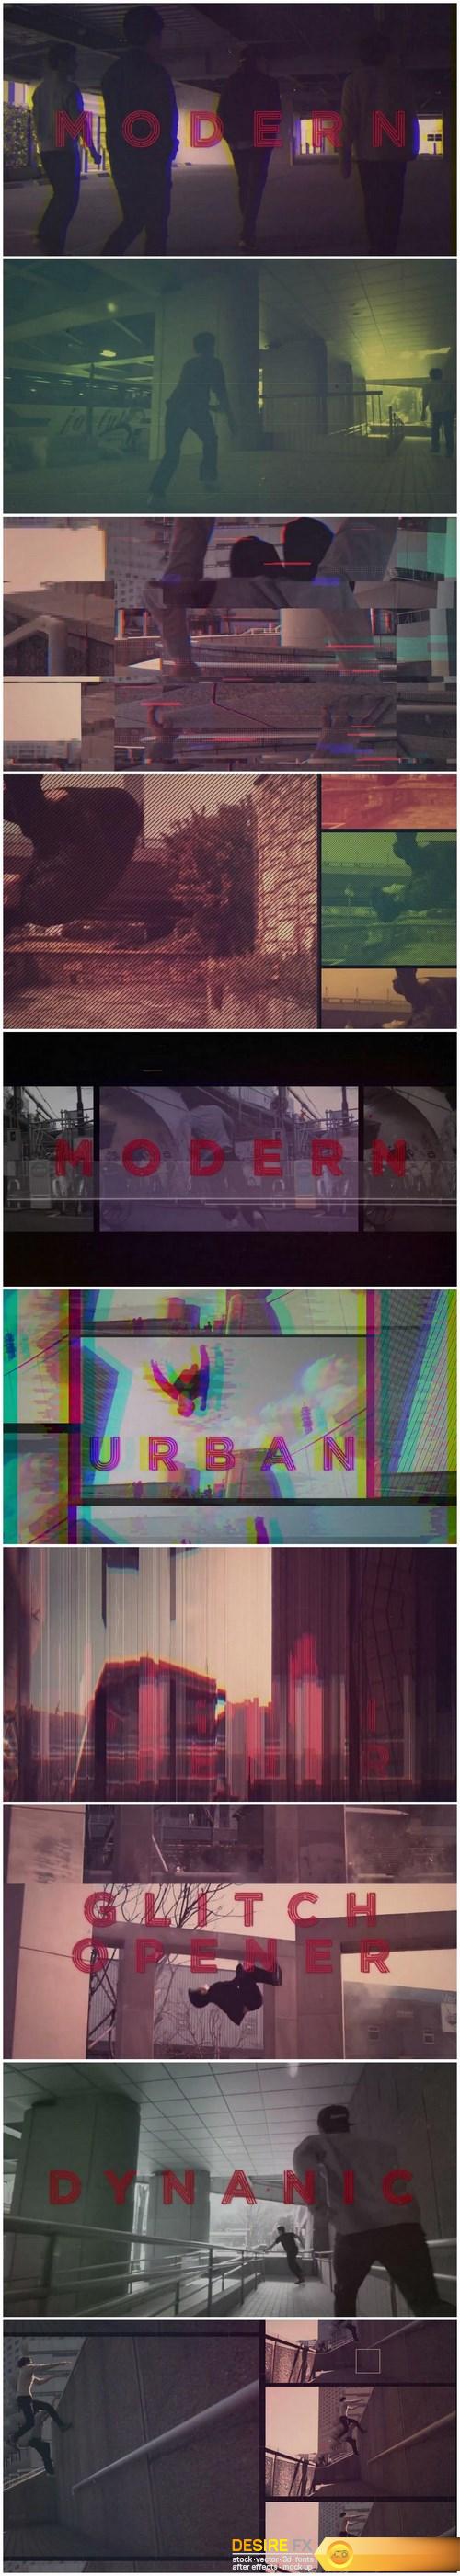 Vintage Urban Promo After Effects Templates